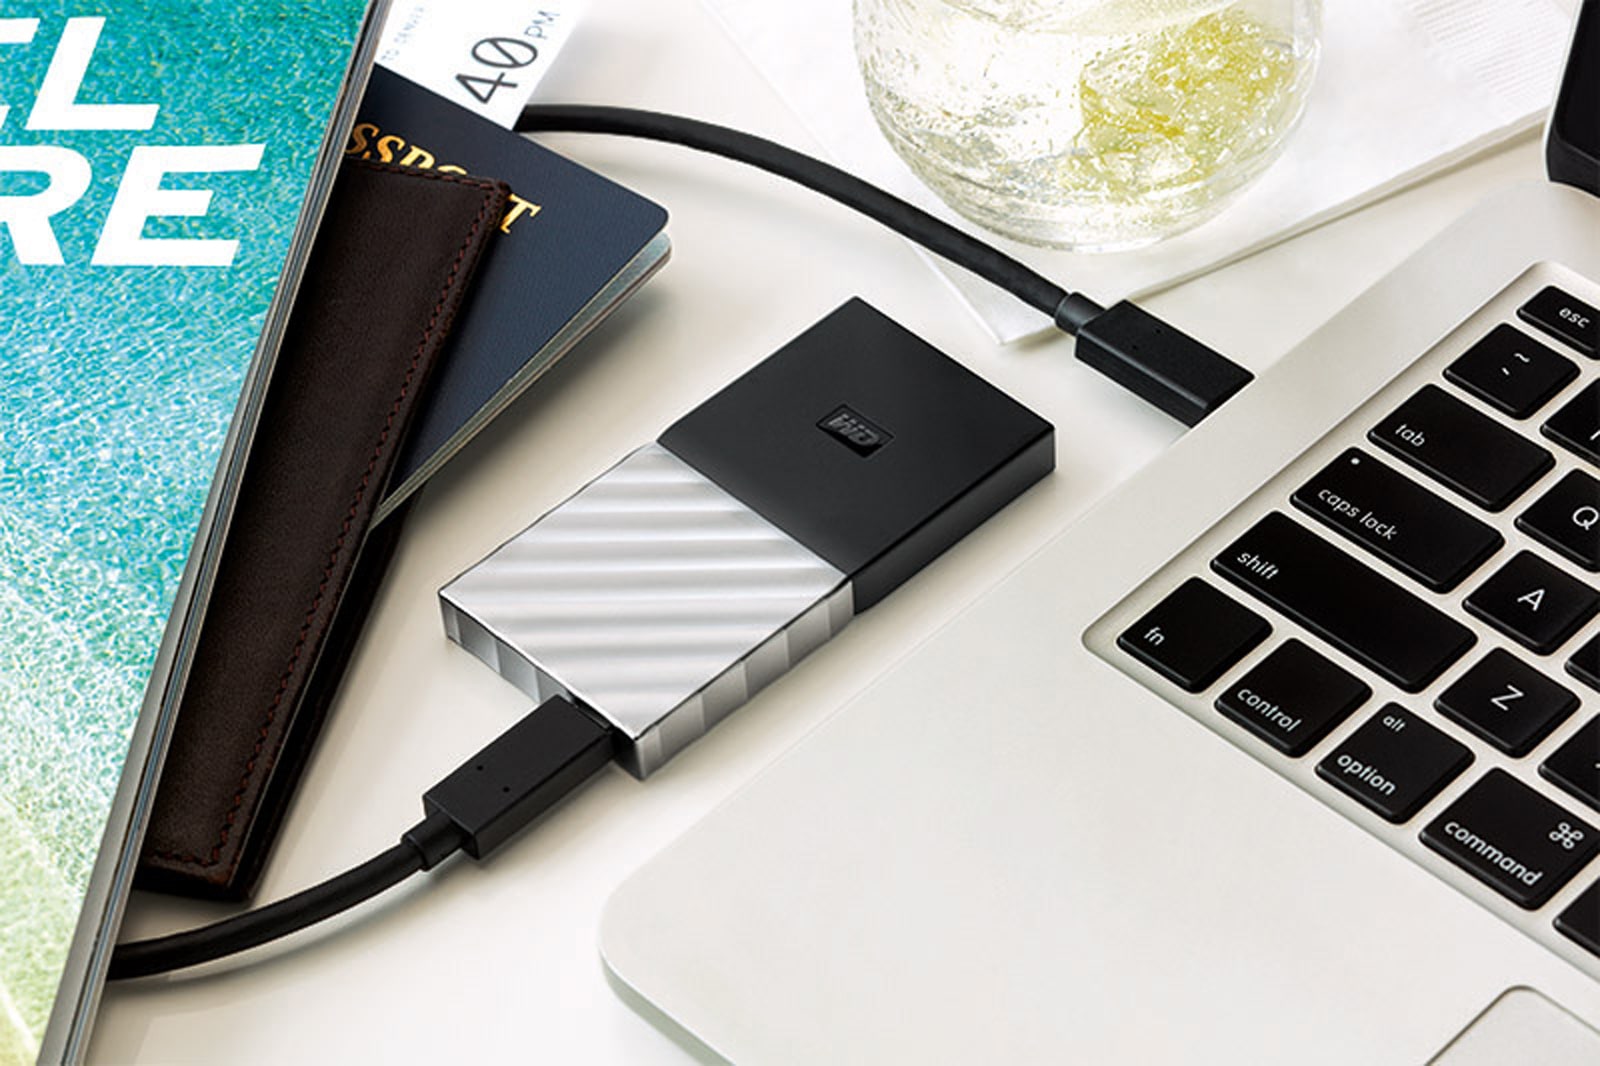 Western Digital unveils its first portable SSD1600 x 1066